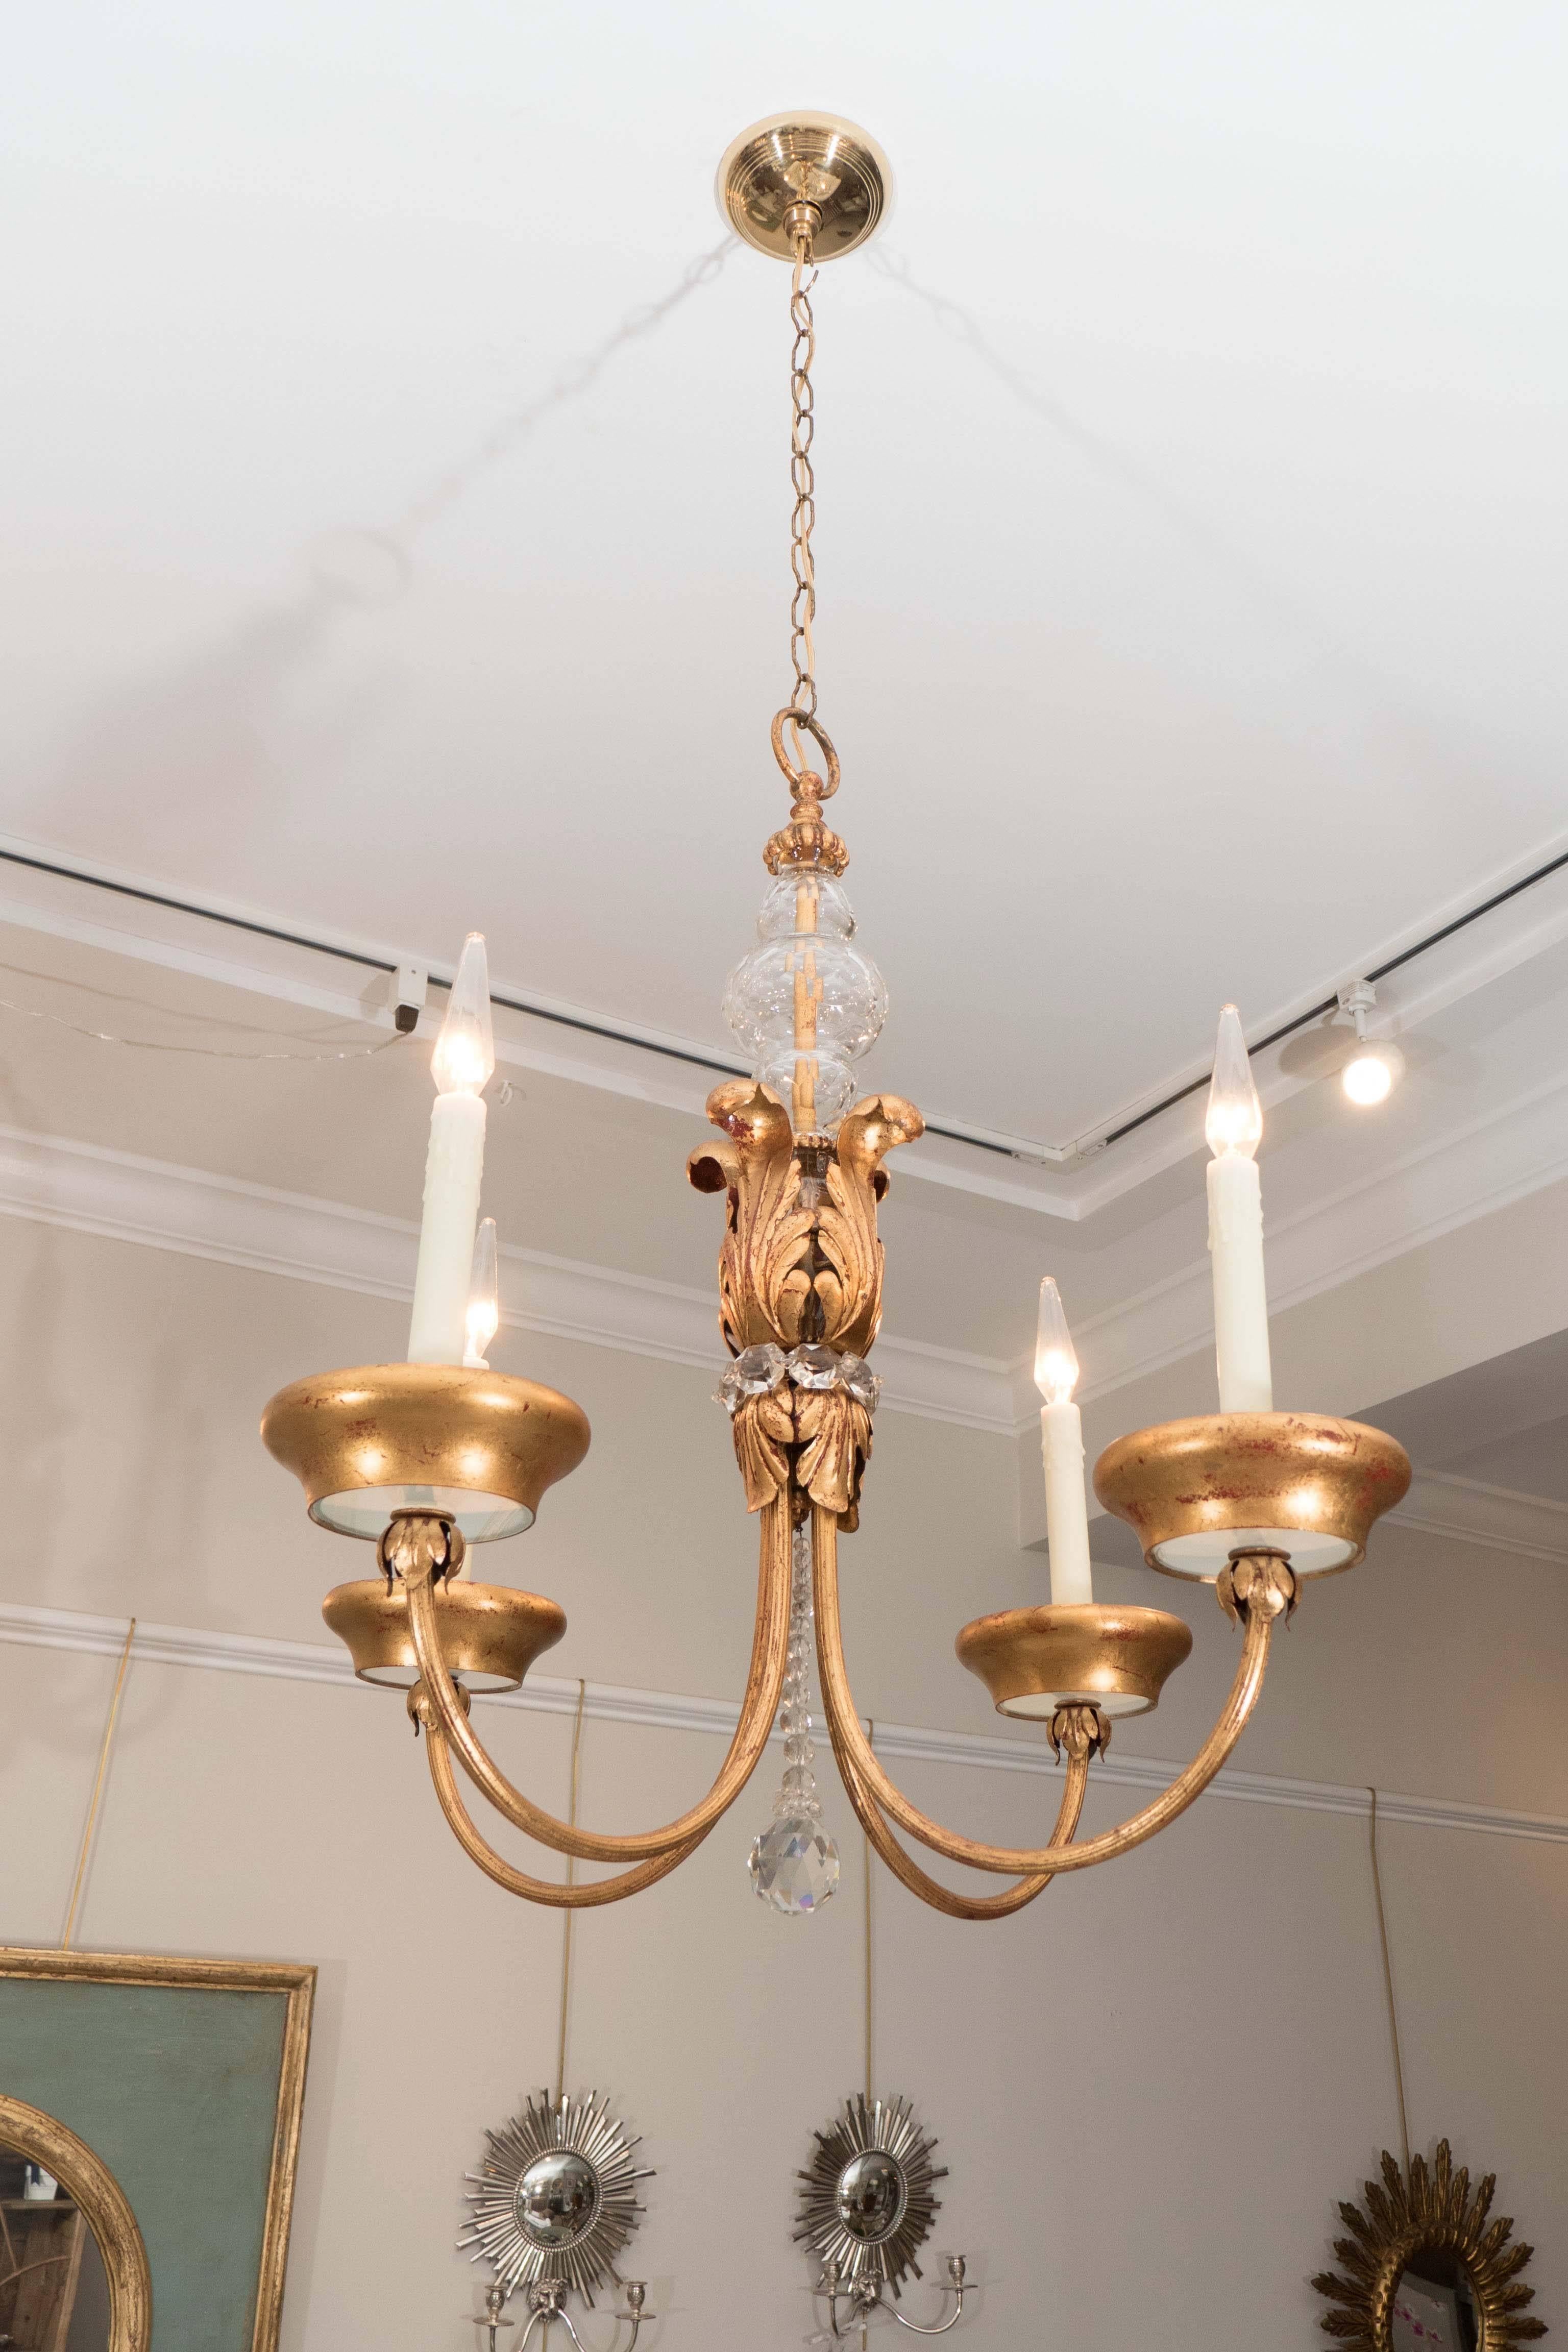 A charming four-arm French chandelier in gilt metal with lovely faceted glass detail at top of chandelier and a glass ornament suspended by a beaded chain at base. The four arms stem from a center scrolled-leaf center ornament surrounded by glass